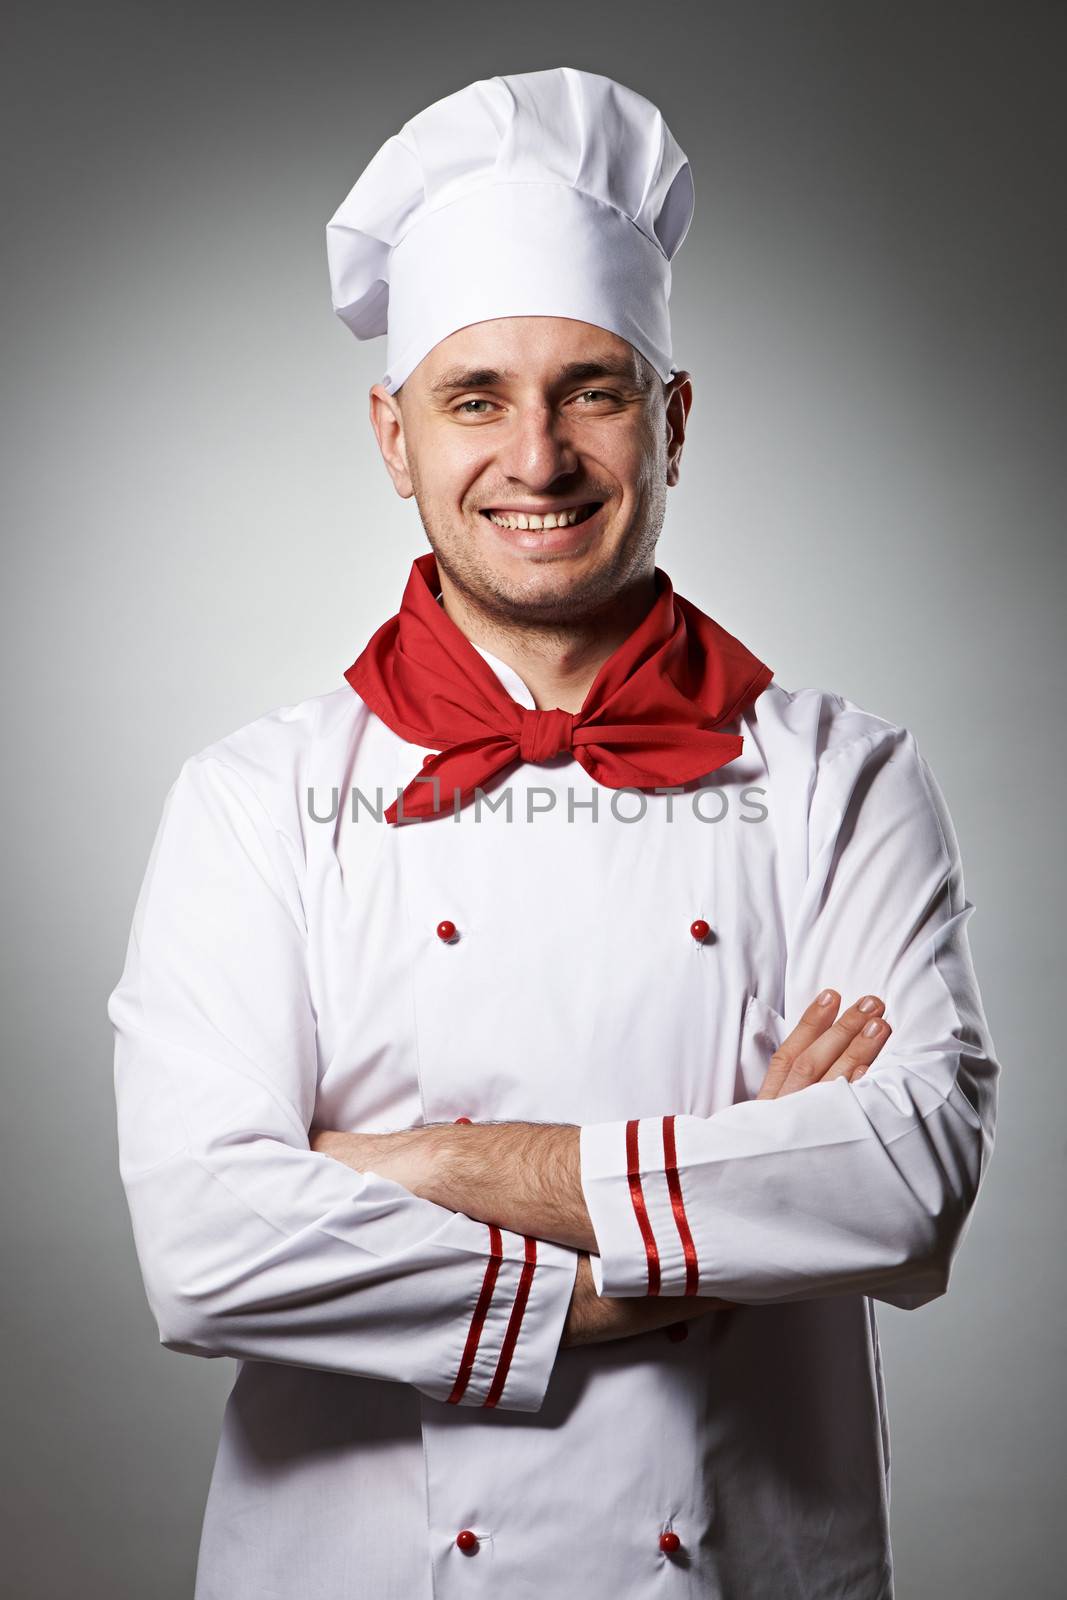 Male chef portrait against grey background